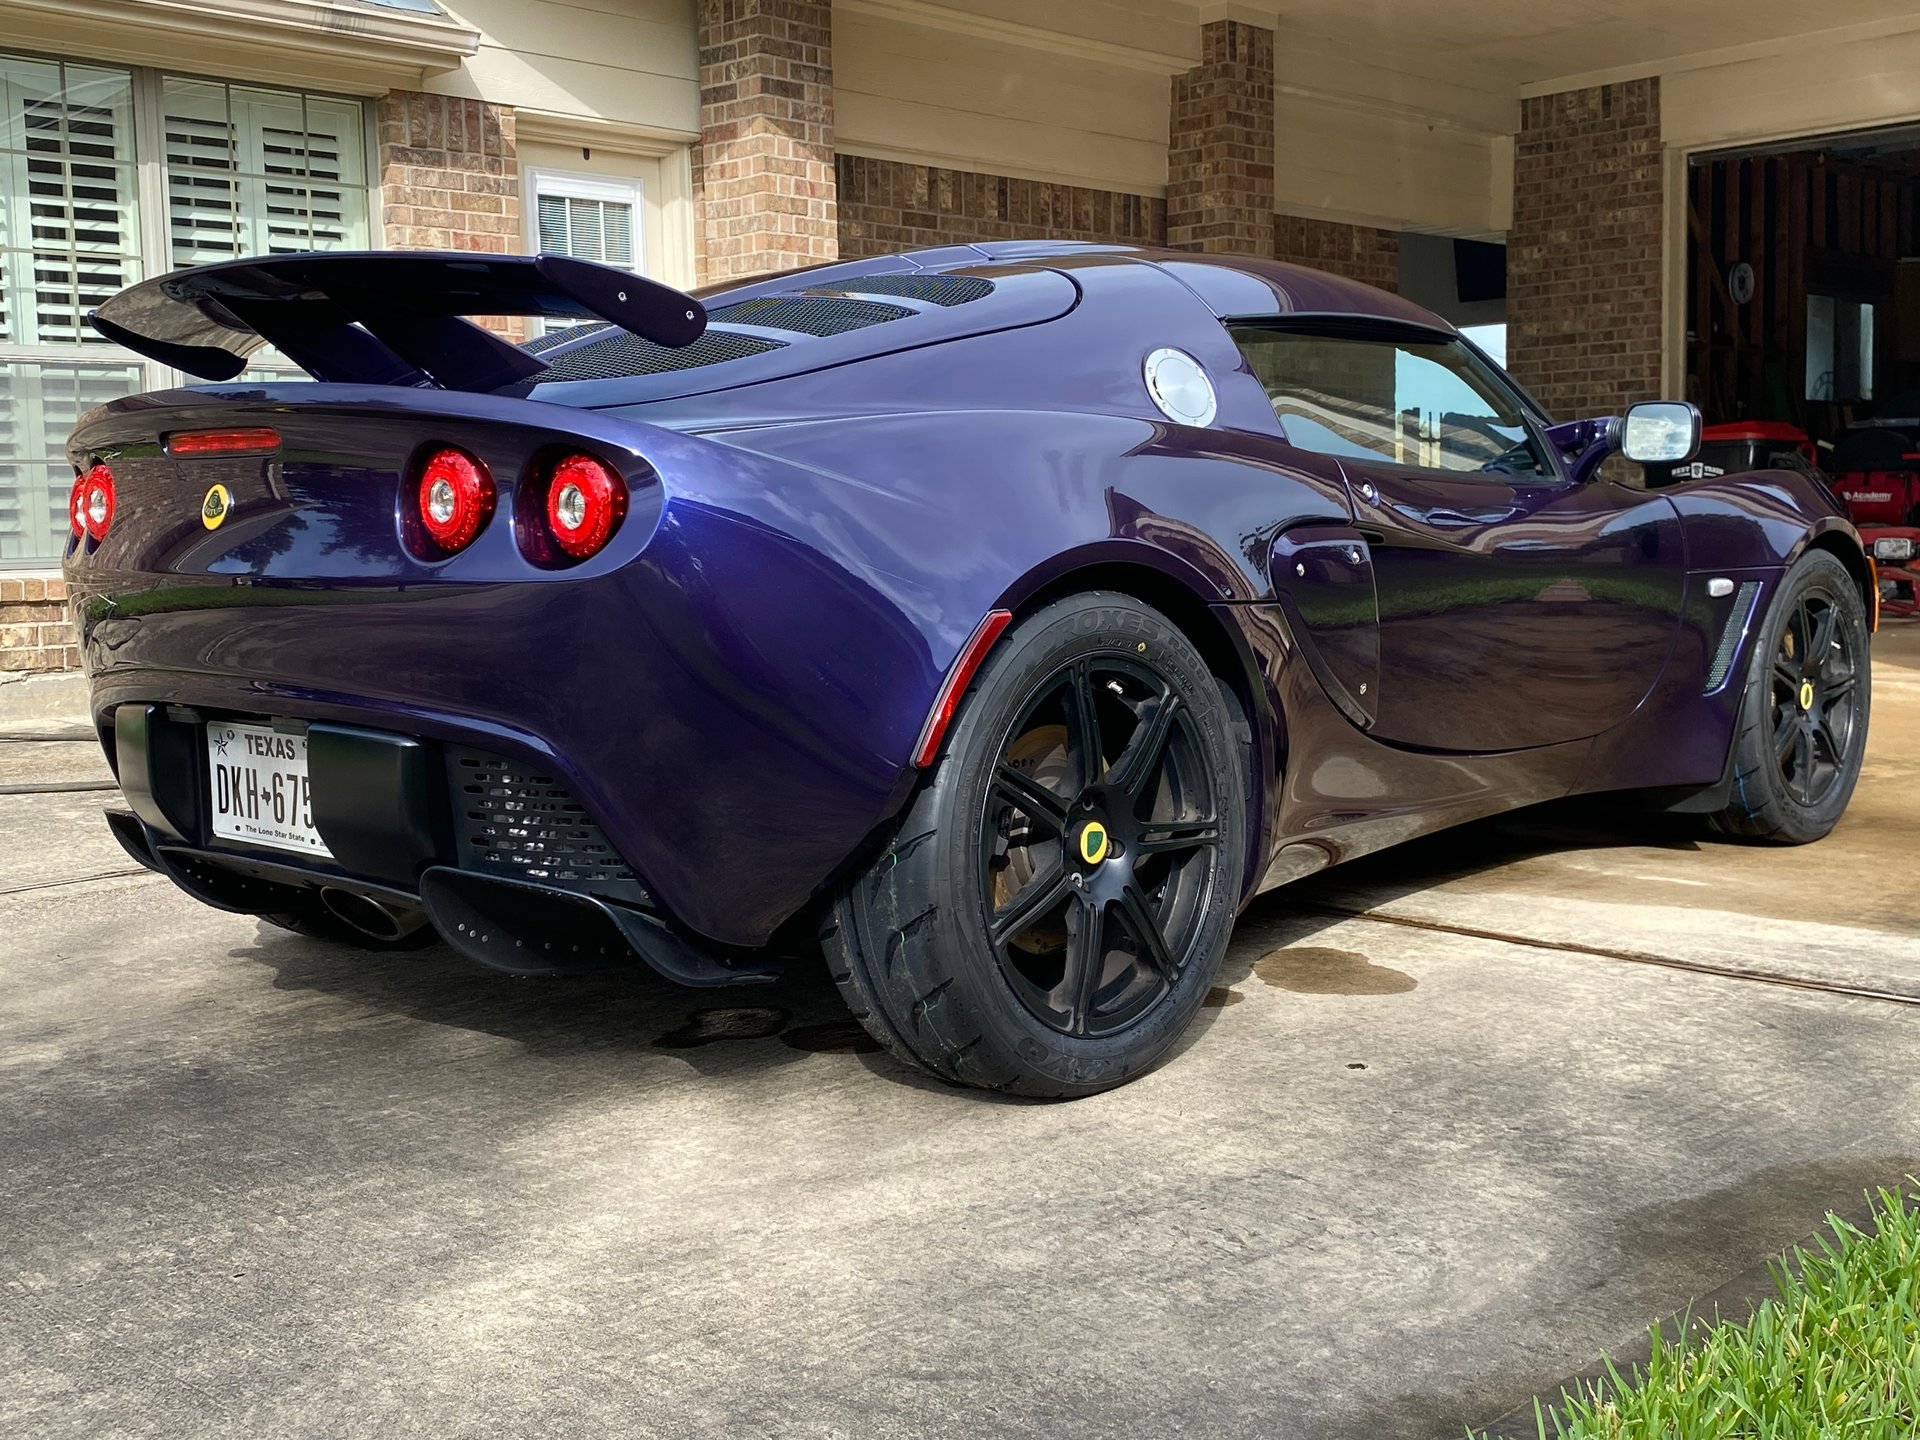 2009 Exige S240 Mostly original, Low miles - Sold | The Lotus Cars Community